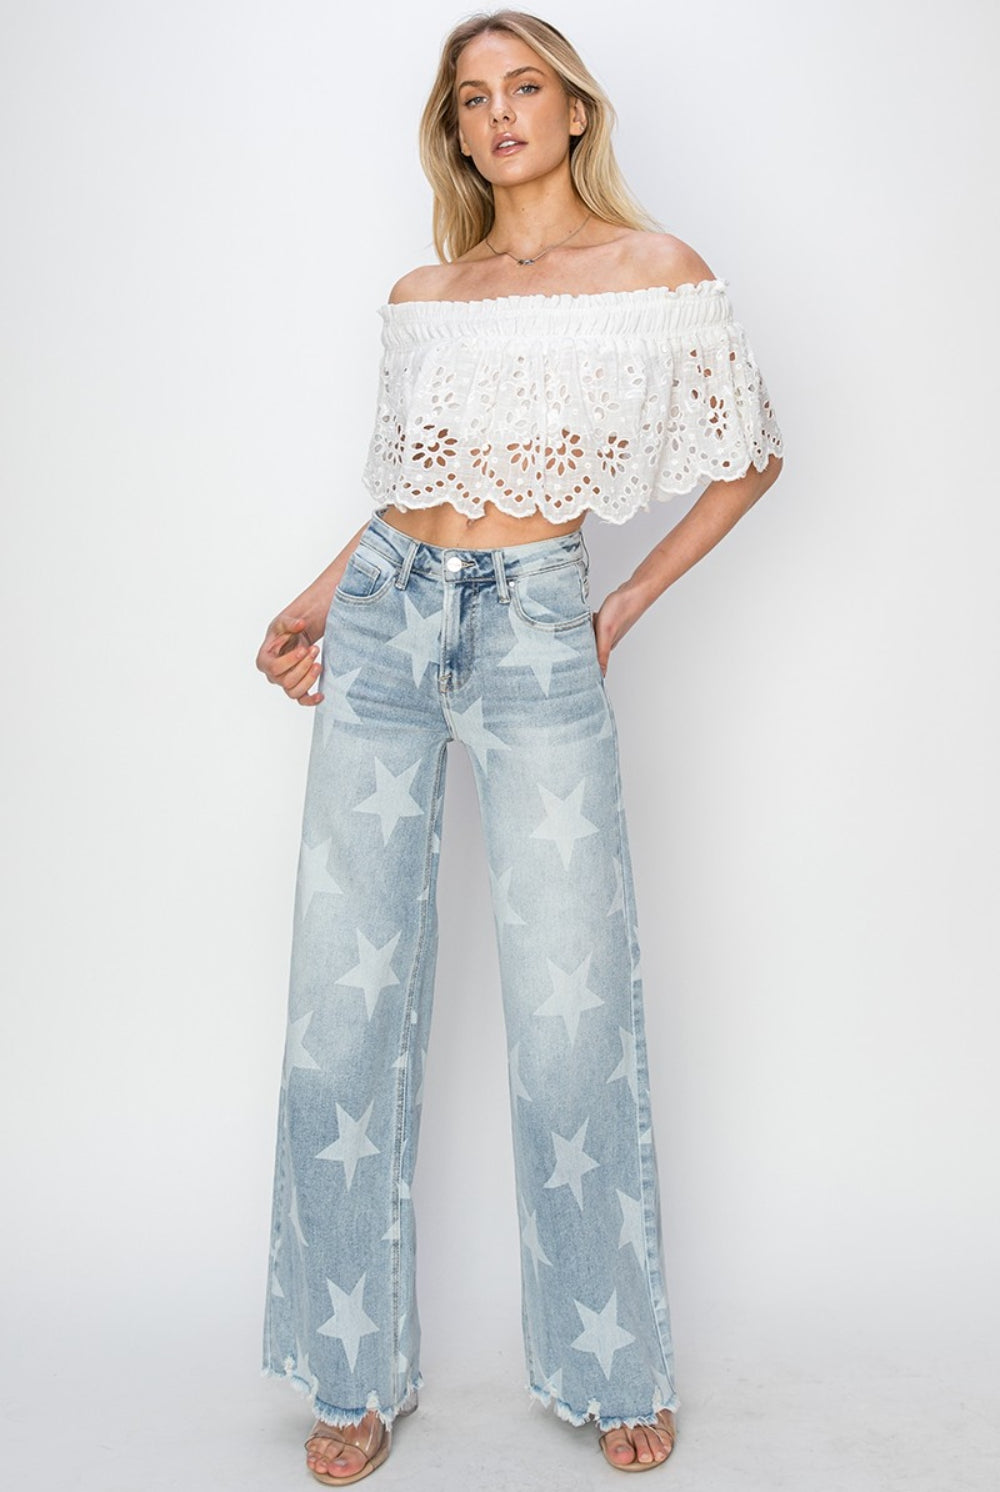 Fashion-forward wide-leg jeans with star print and frayed hem, channeling a celestial vibe.